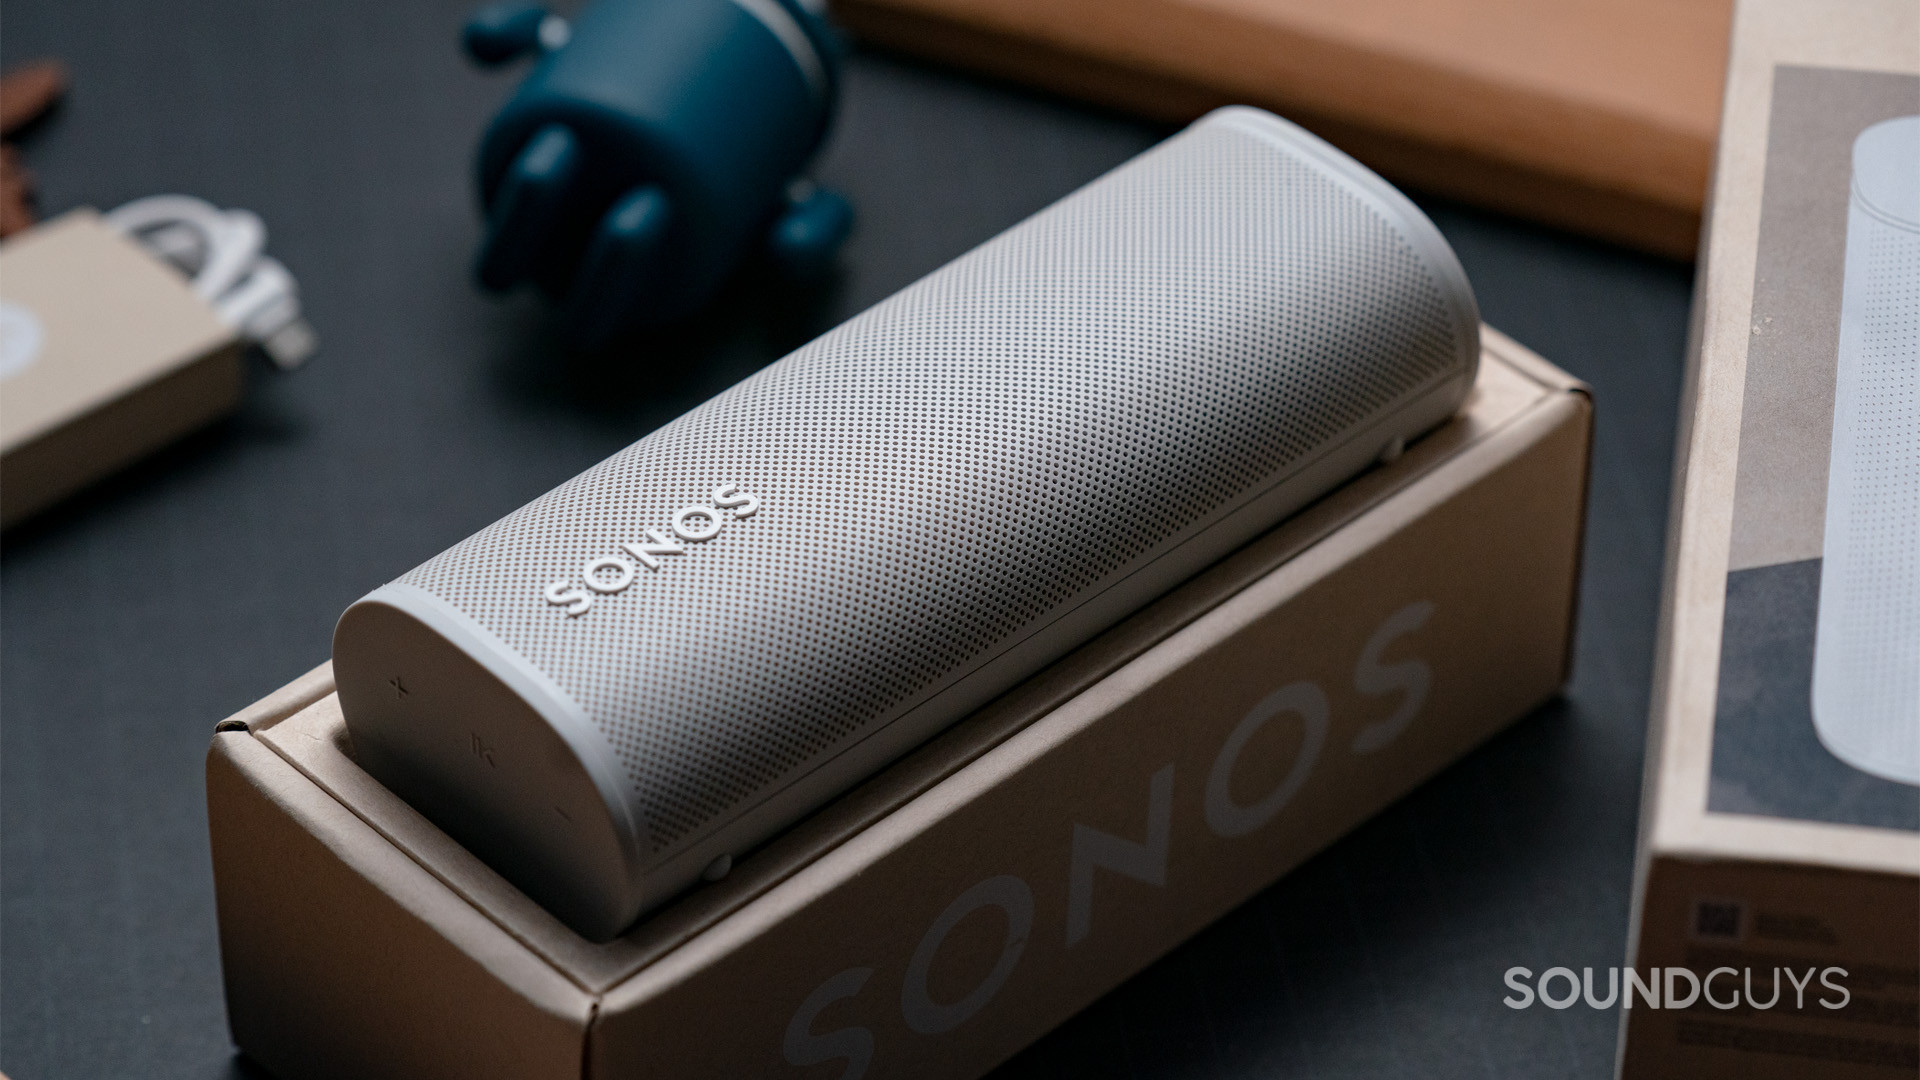 Sonos Roam review: A good speaker in a small package - CNET